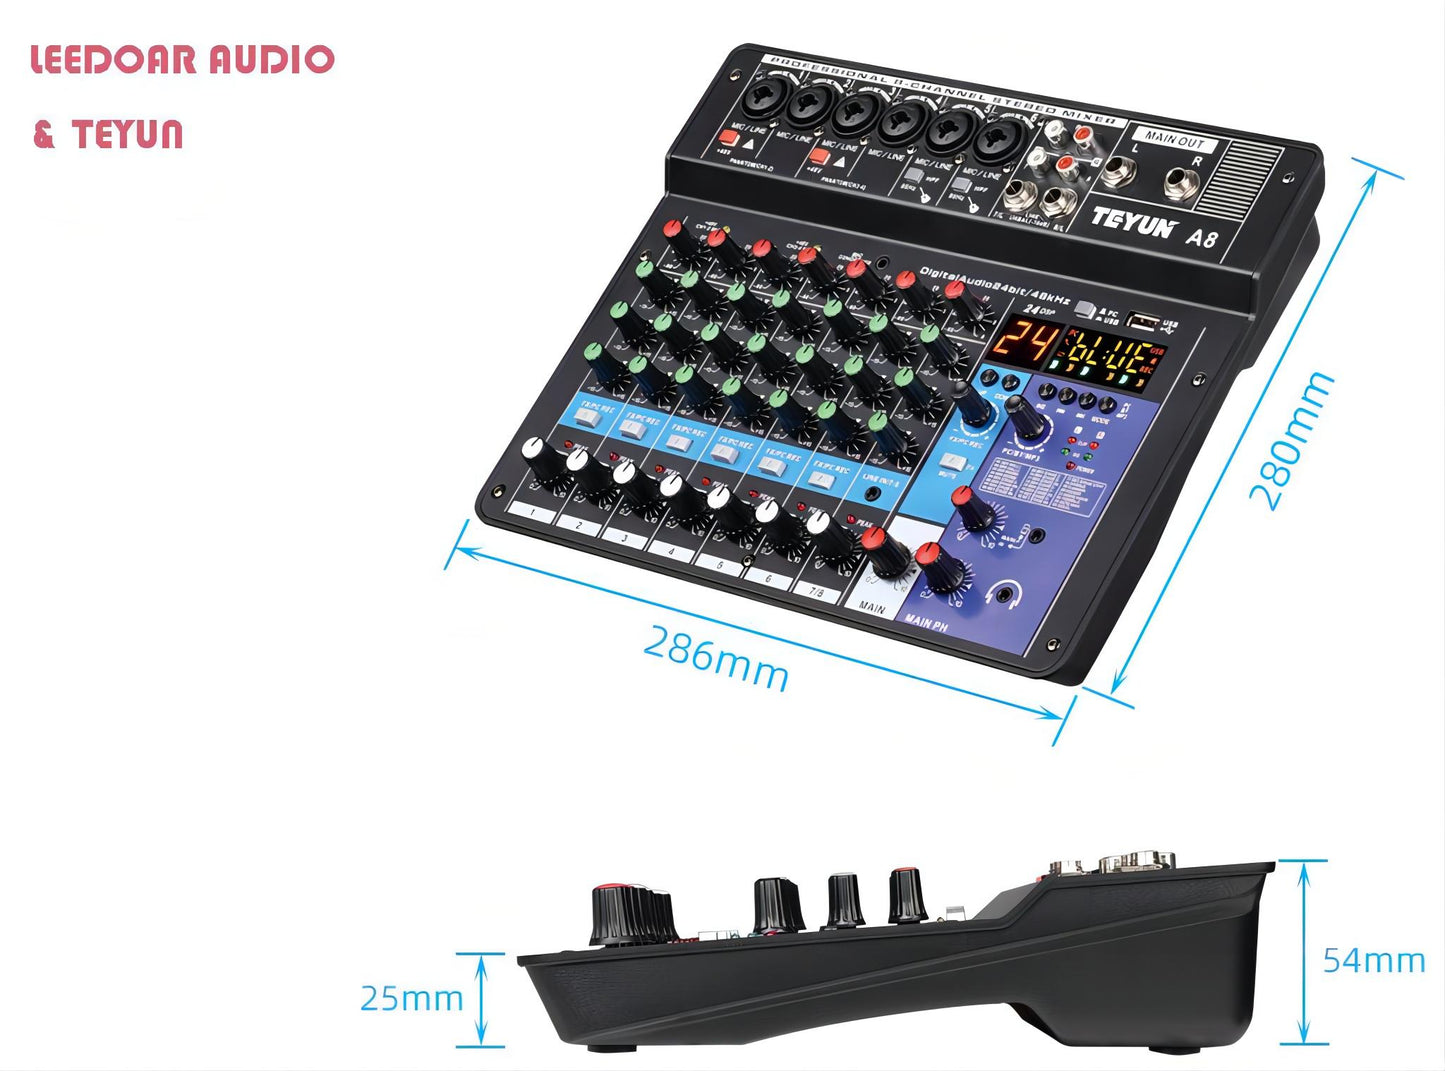 TEYUN 8 6 4 Channel Professional Portable Mixer Sound Mixing Console Computer Input 48v Power Number Live Broadcast A4 A6 A8 New